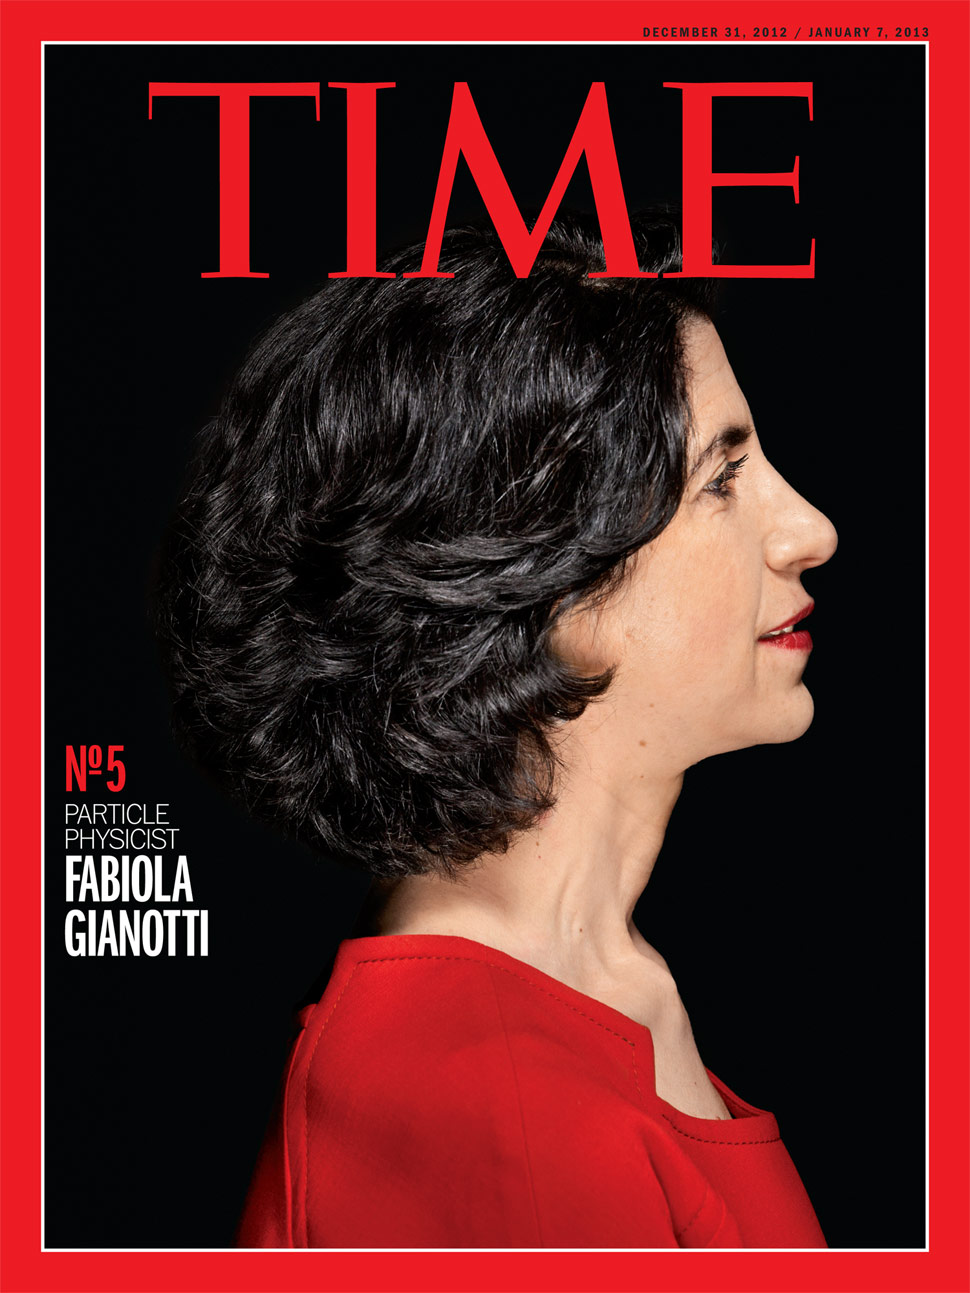 time-s-person-of-the-year-issue-cover-gallery-time-s-person-of-the-year-issue-cover-gallery